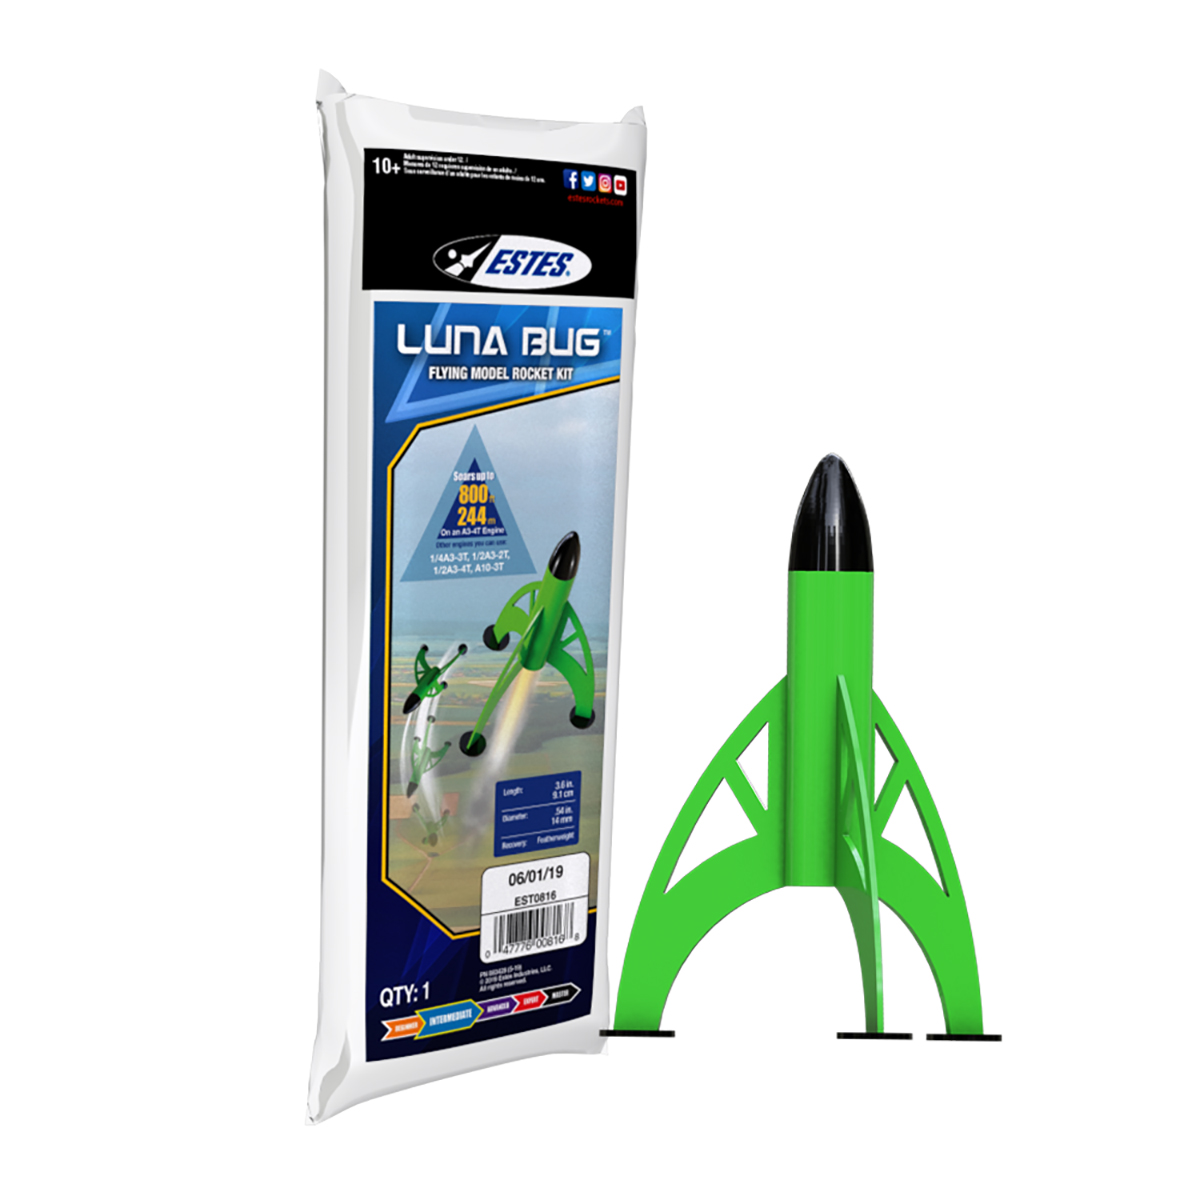 Estes Rockets Holiday Sale: Free ornament + Mystery Rocket with every purchase